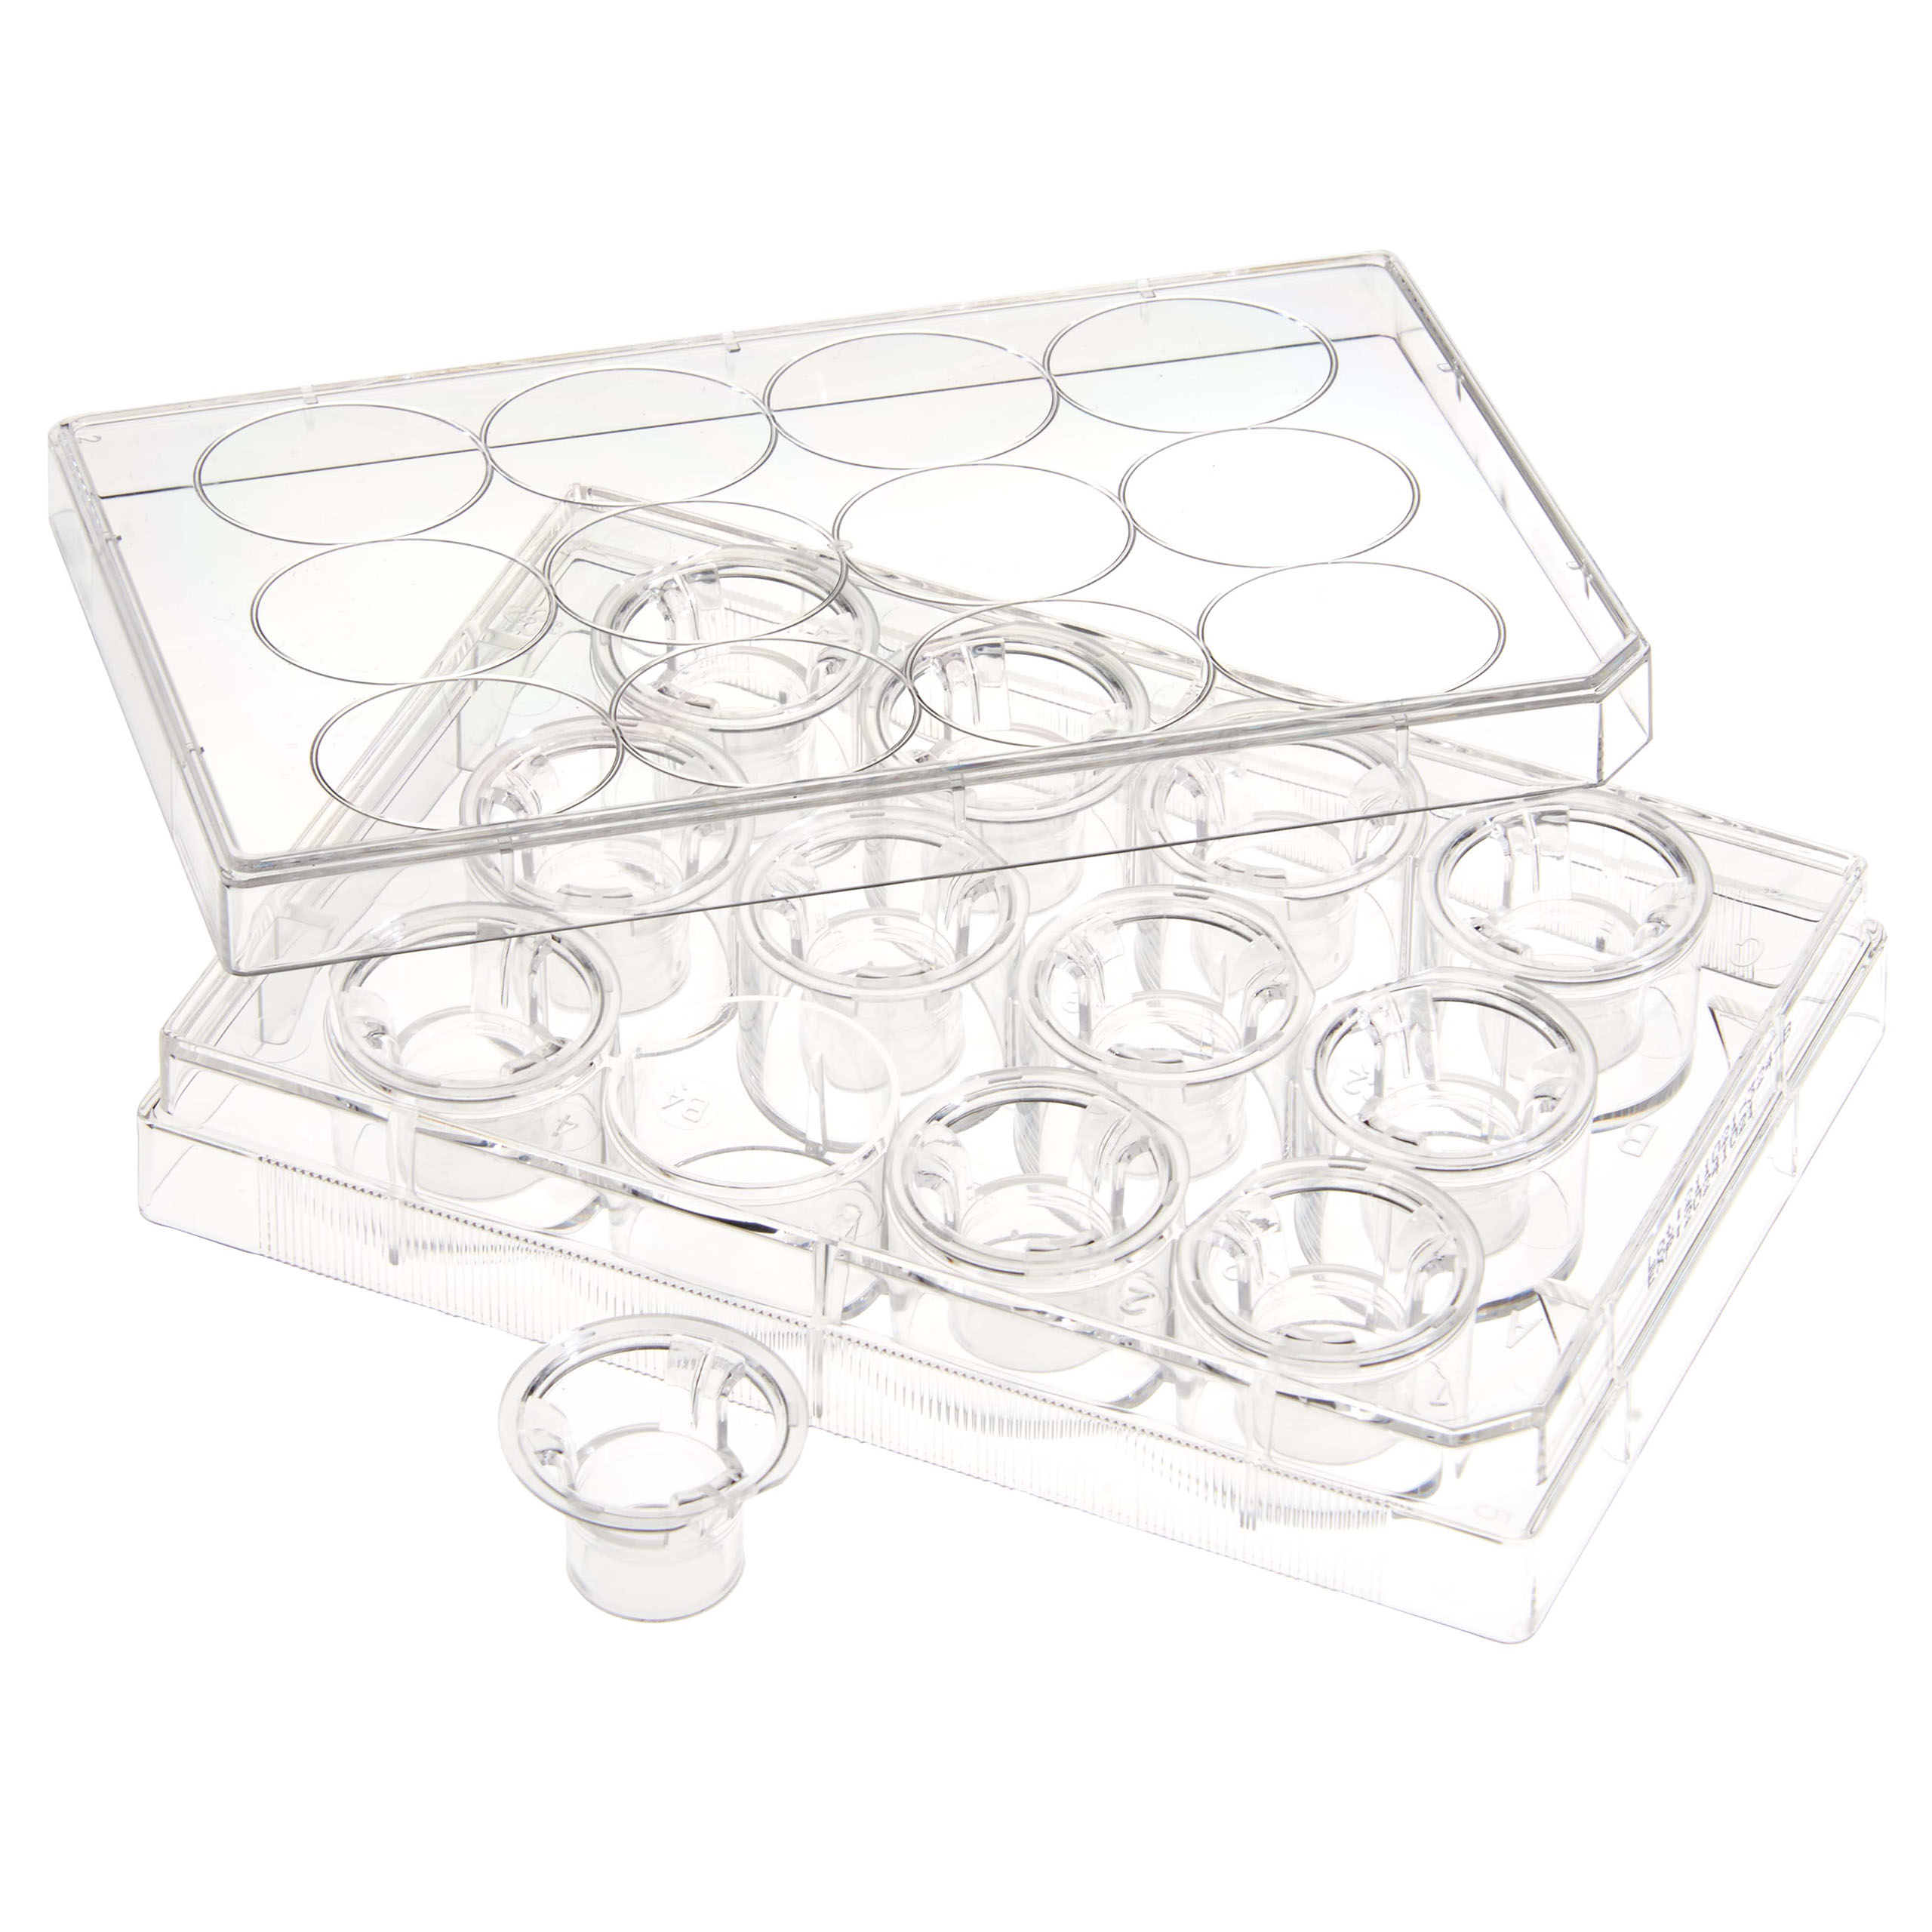 Plates-Permeable Cell Culture Inserts | 230621 • CELLTREAT 